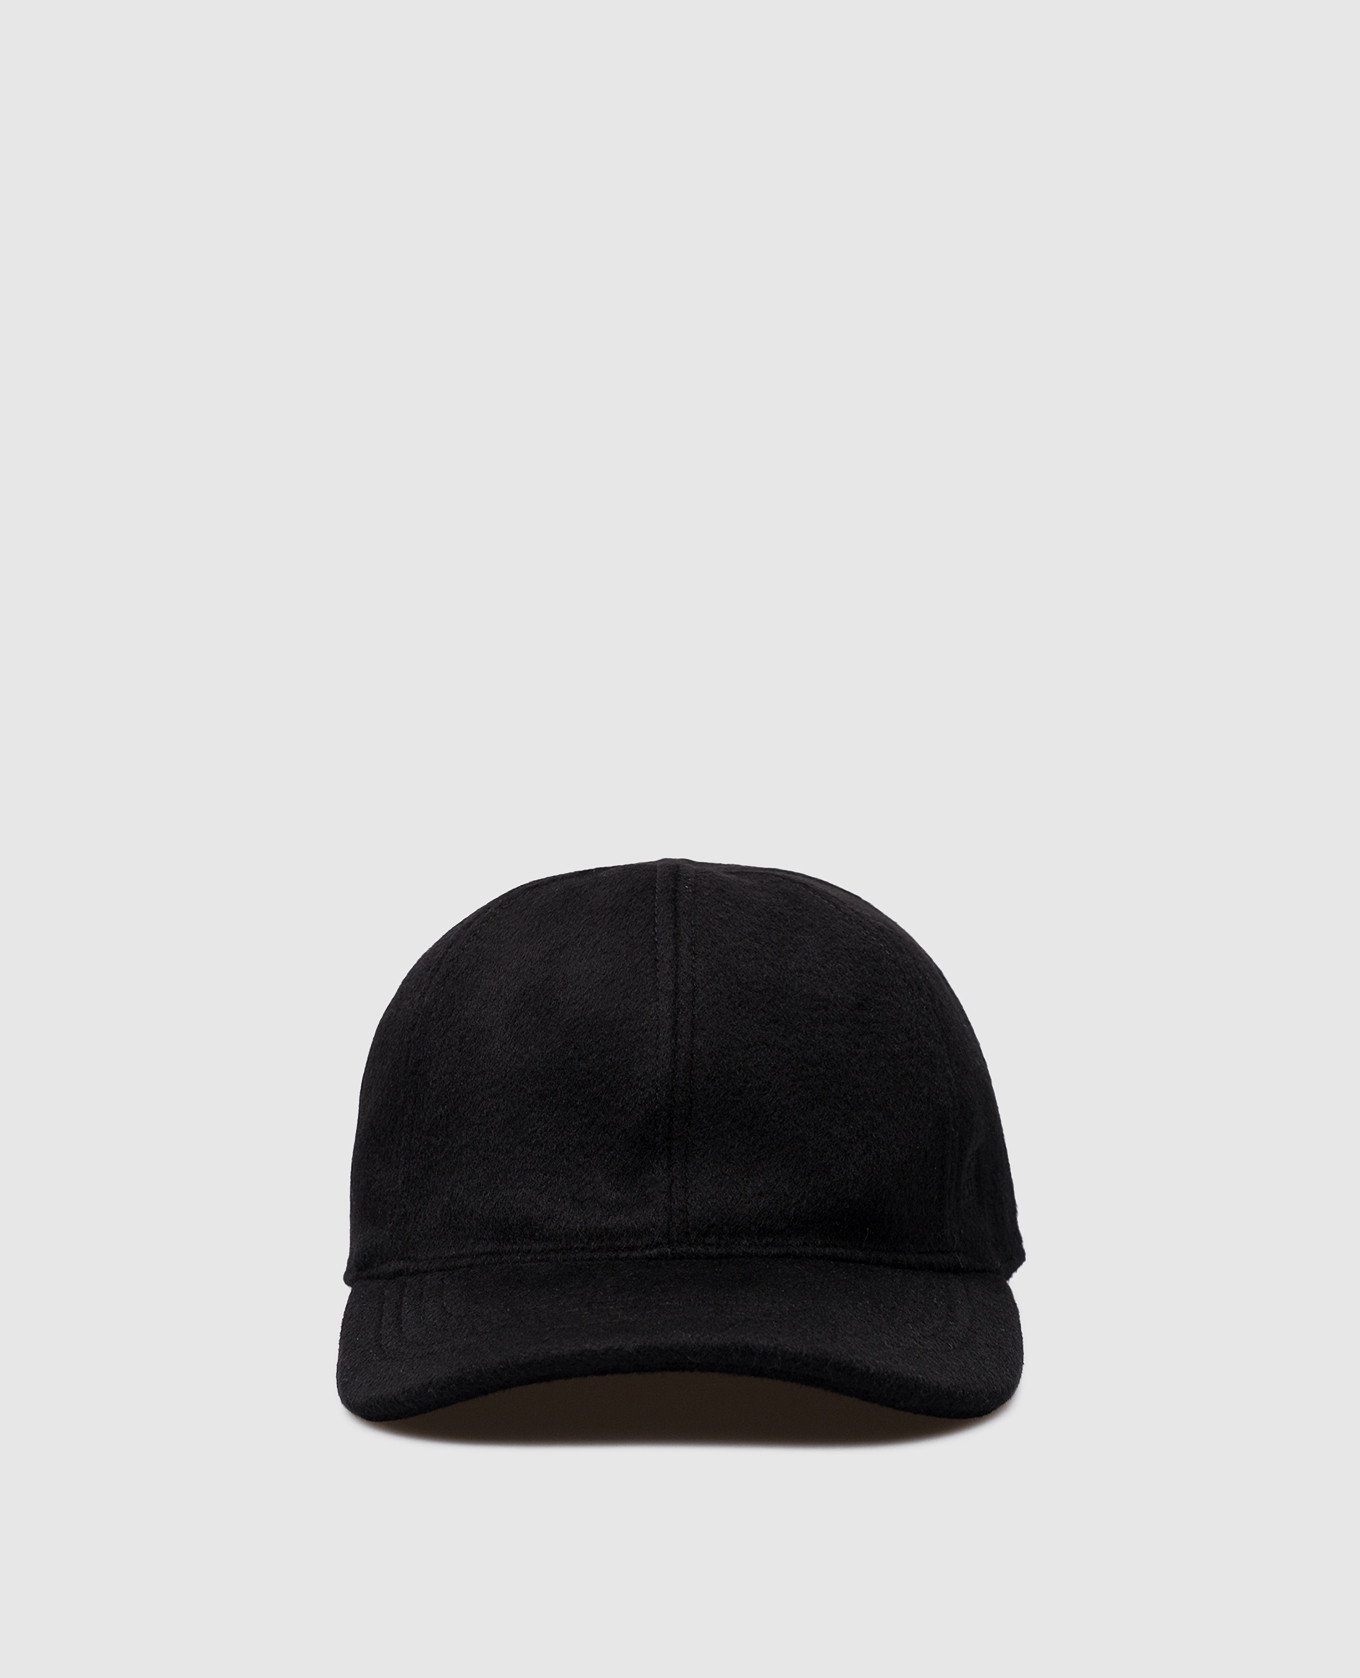 Black wool and cashmere cap with logo